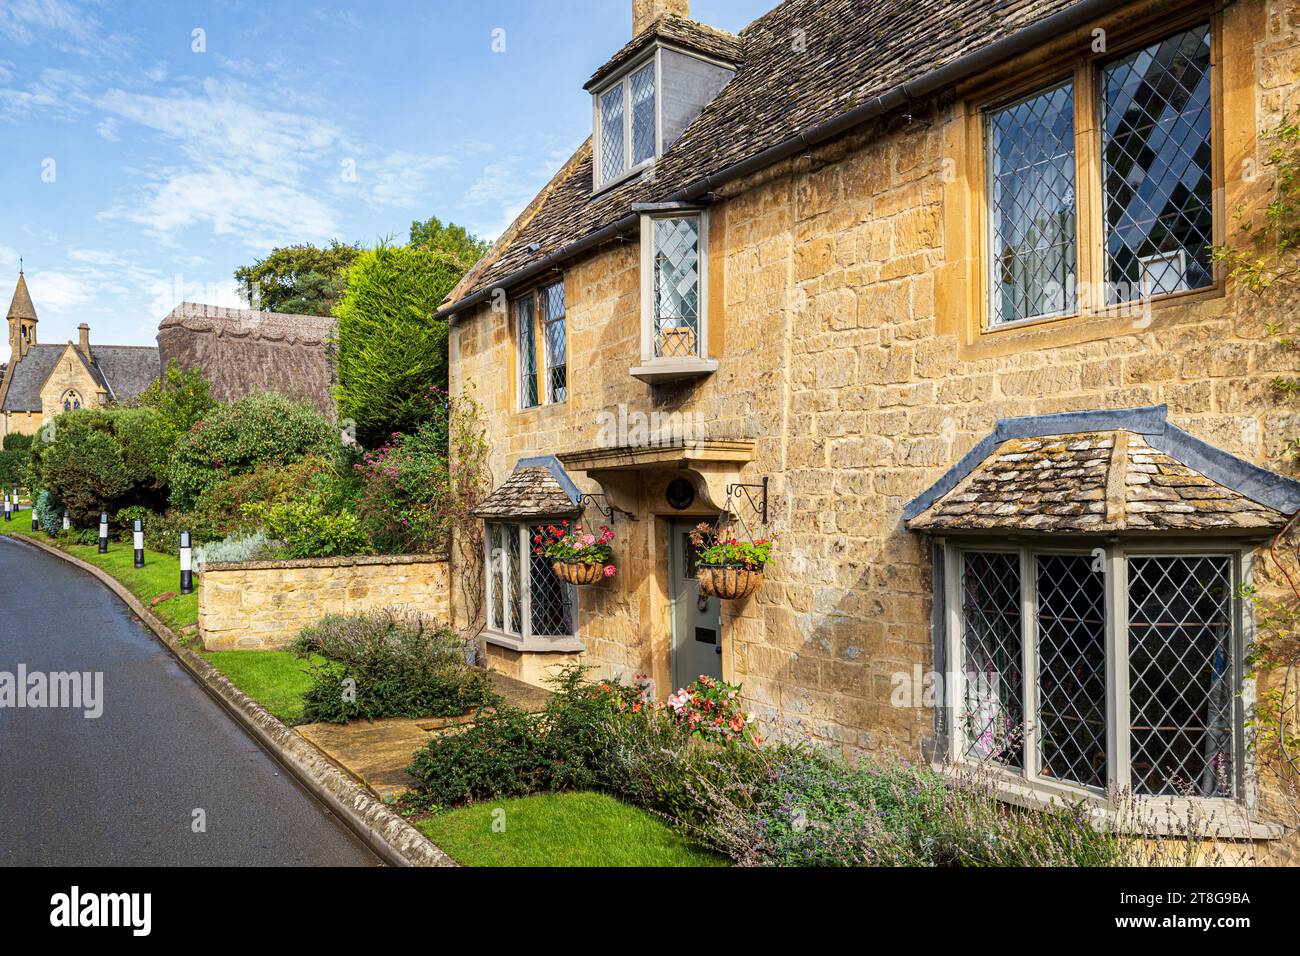 The Malt House (originally an 18th century house & malthouse) in the Cotswold village of Broad Campden, Gloucestershire, England UK Stock Photo